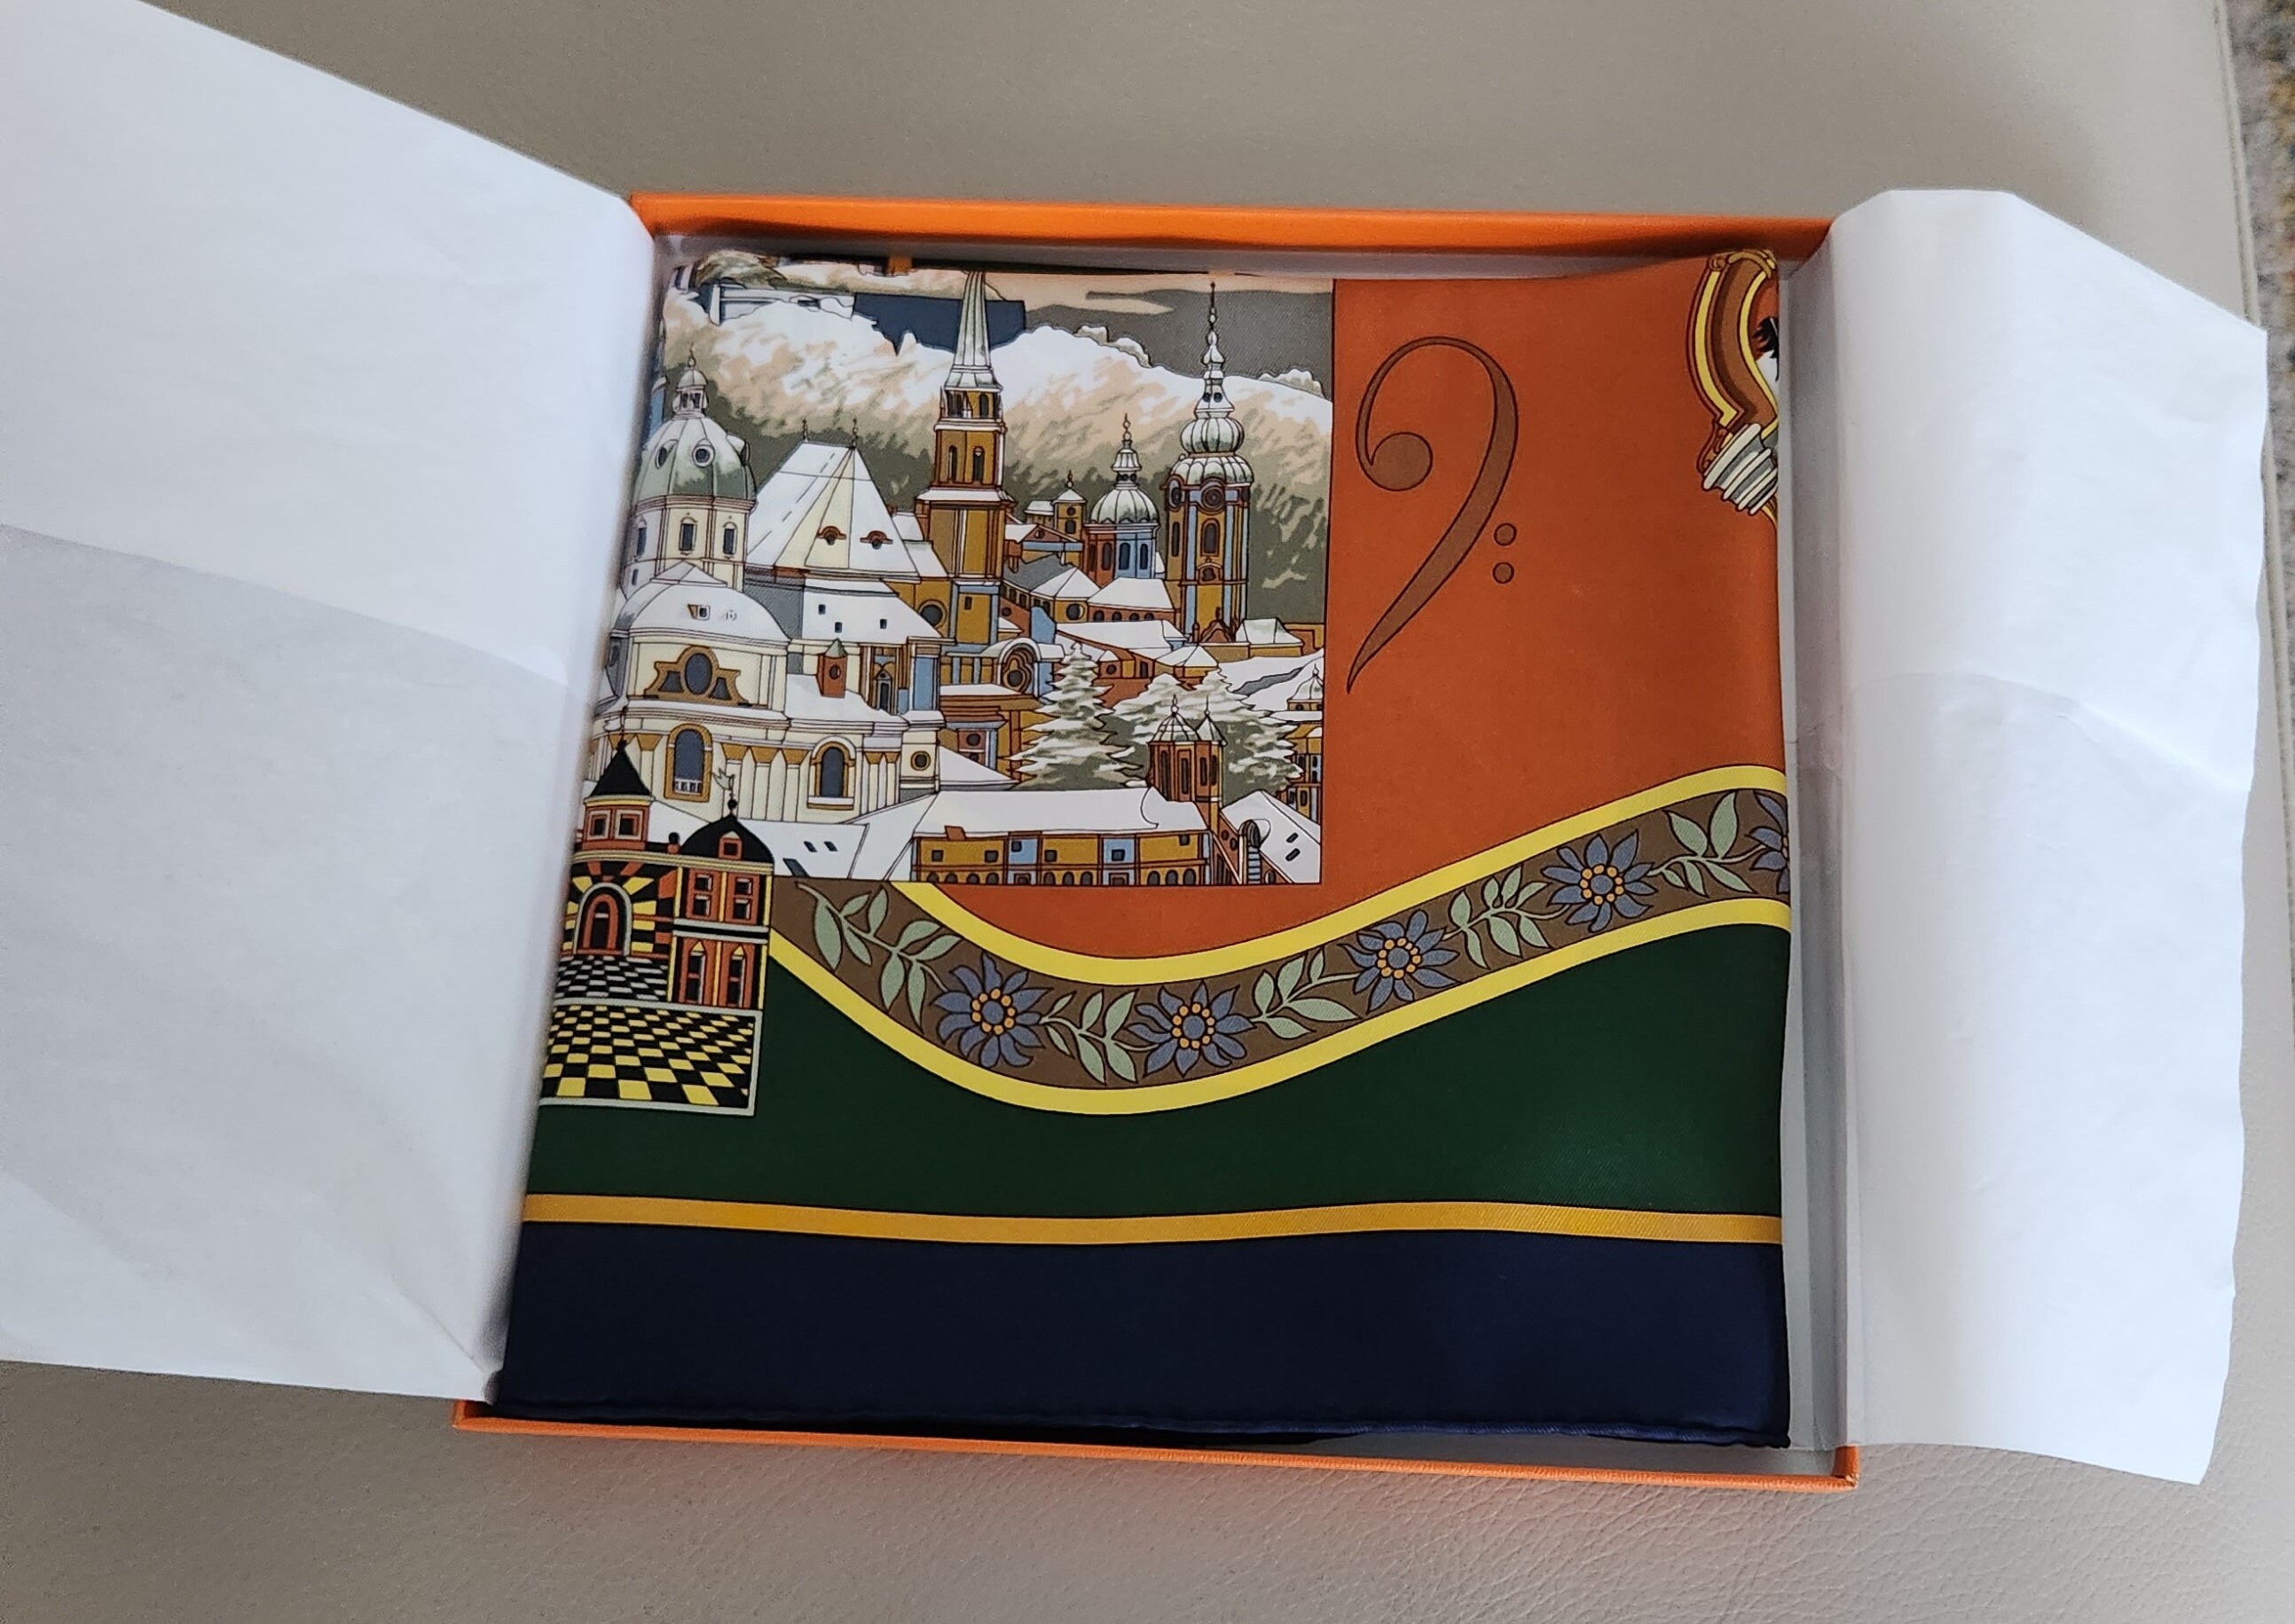 Quick way to authenticate your #Hermes box / item #hermesbox